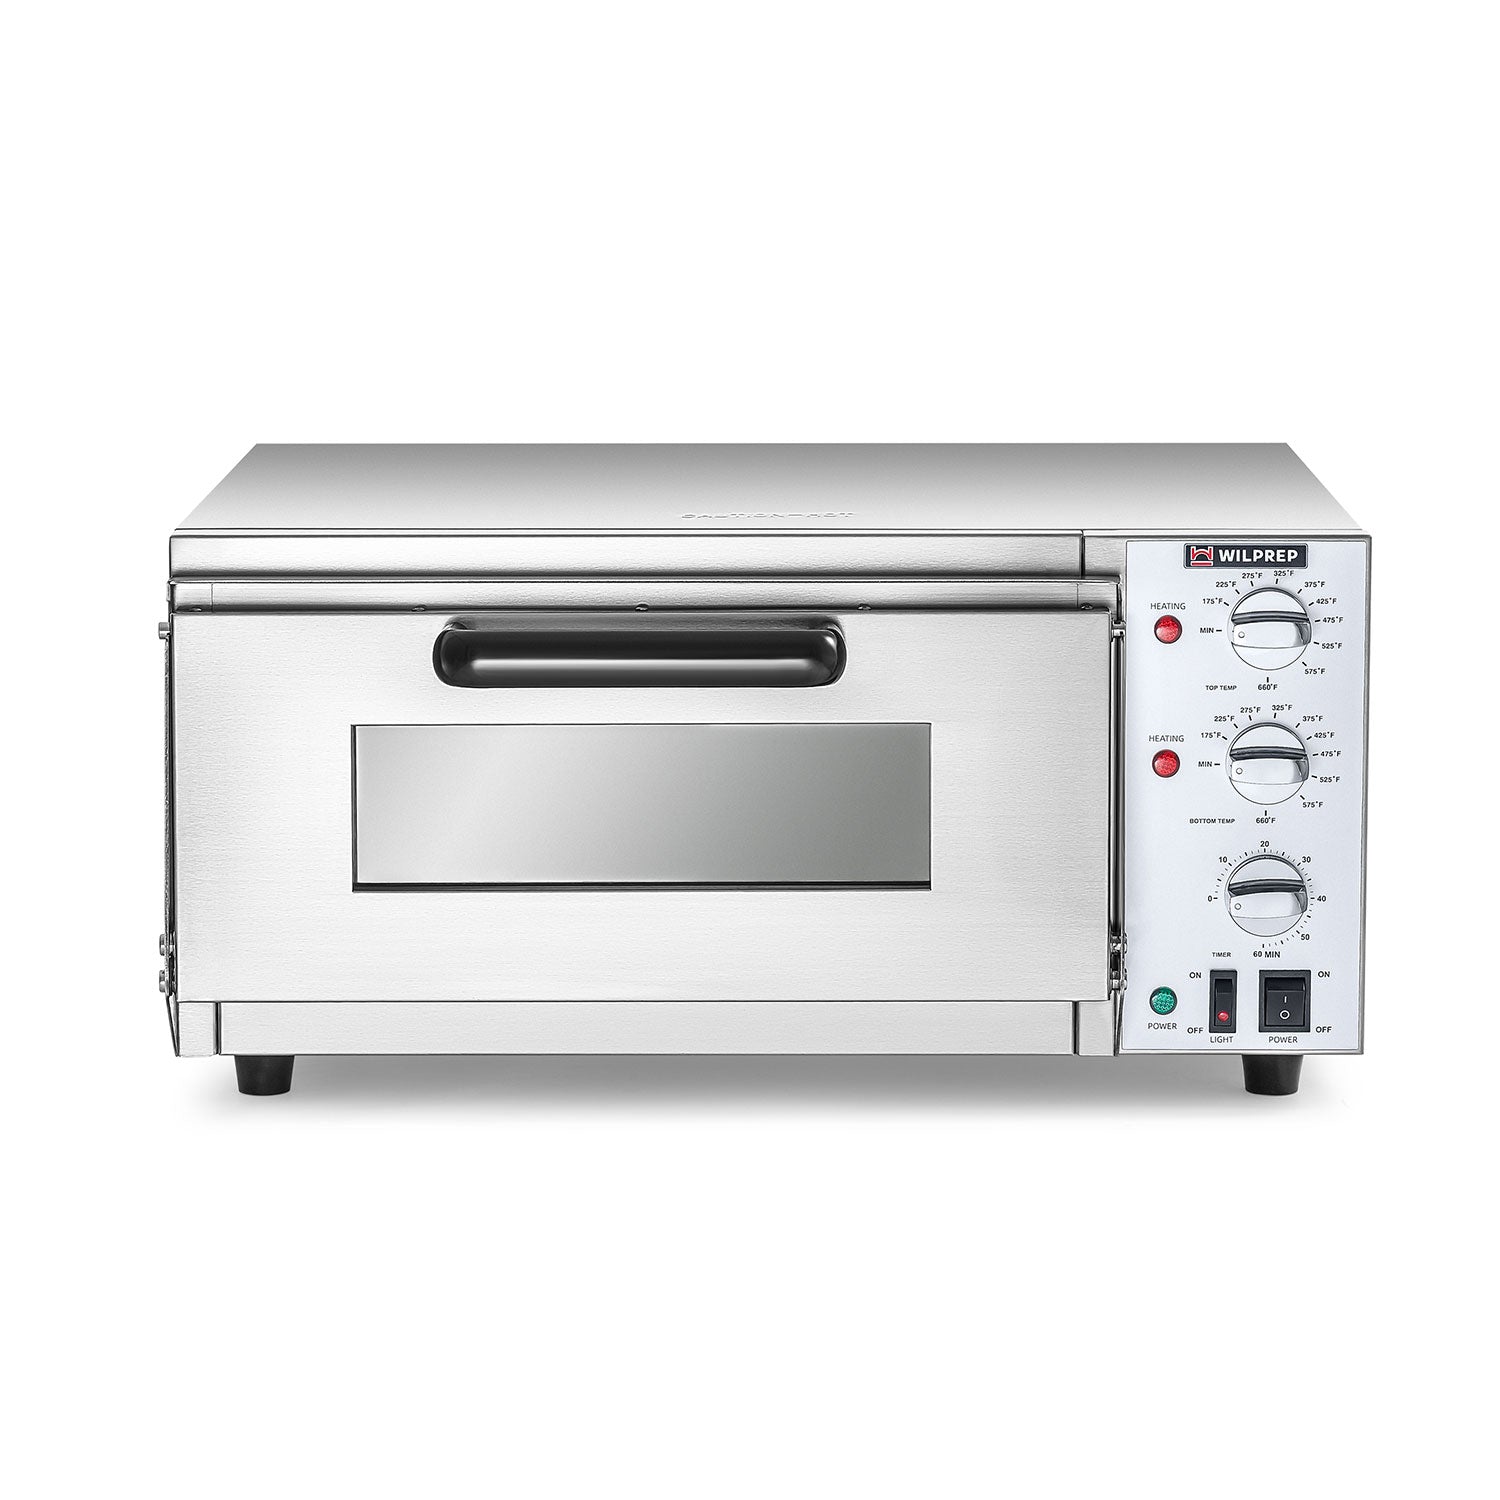 16" Commercial Countertop Oven for Pizza